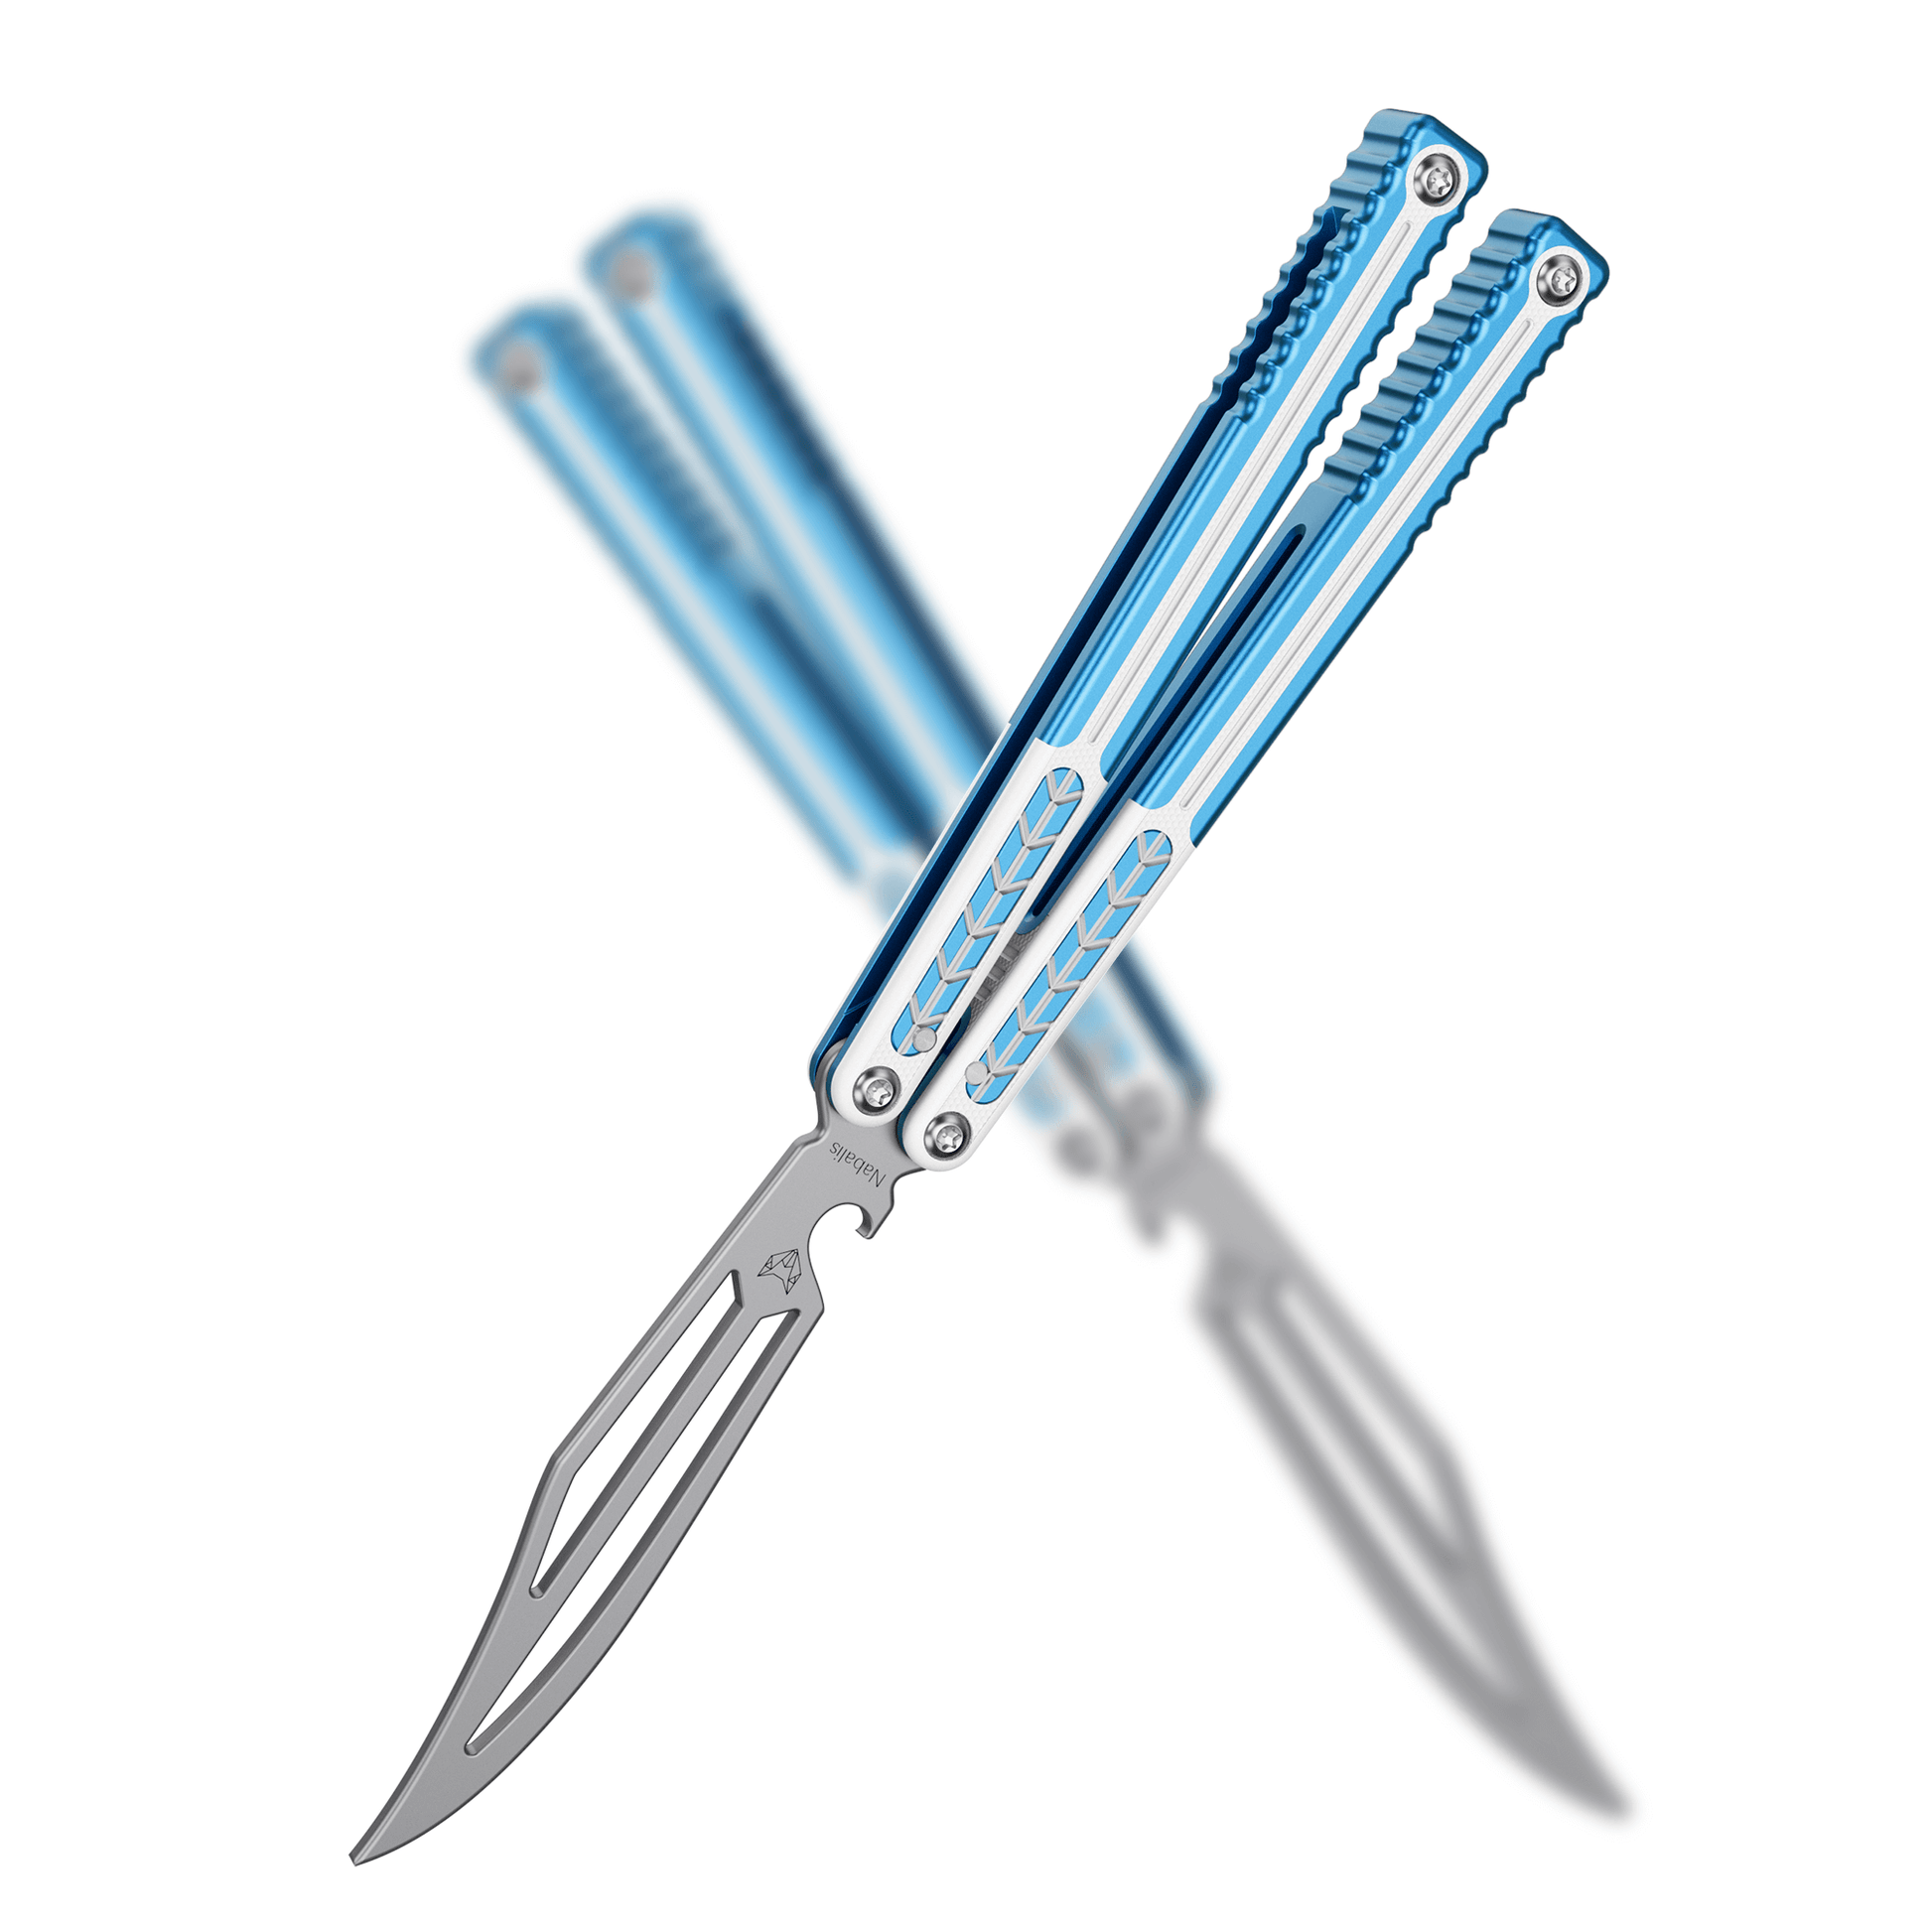 Nabalis Vulp Pro Balisong Butterfly Knife Trainer-Bule